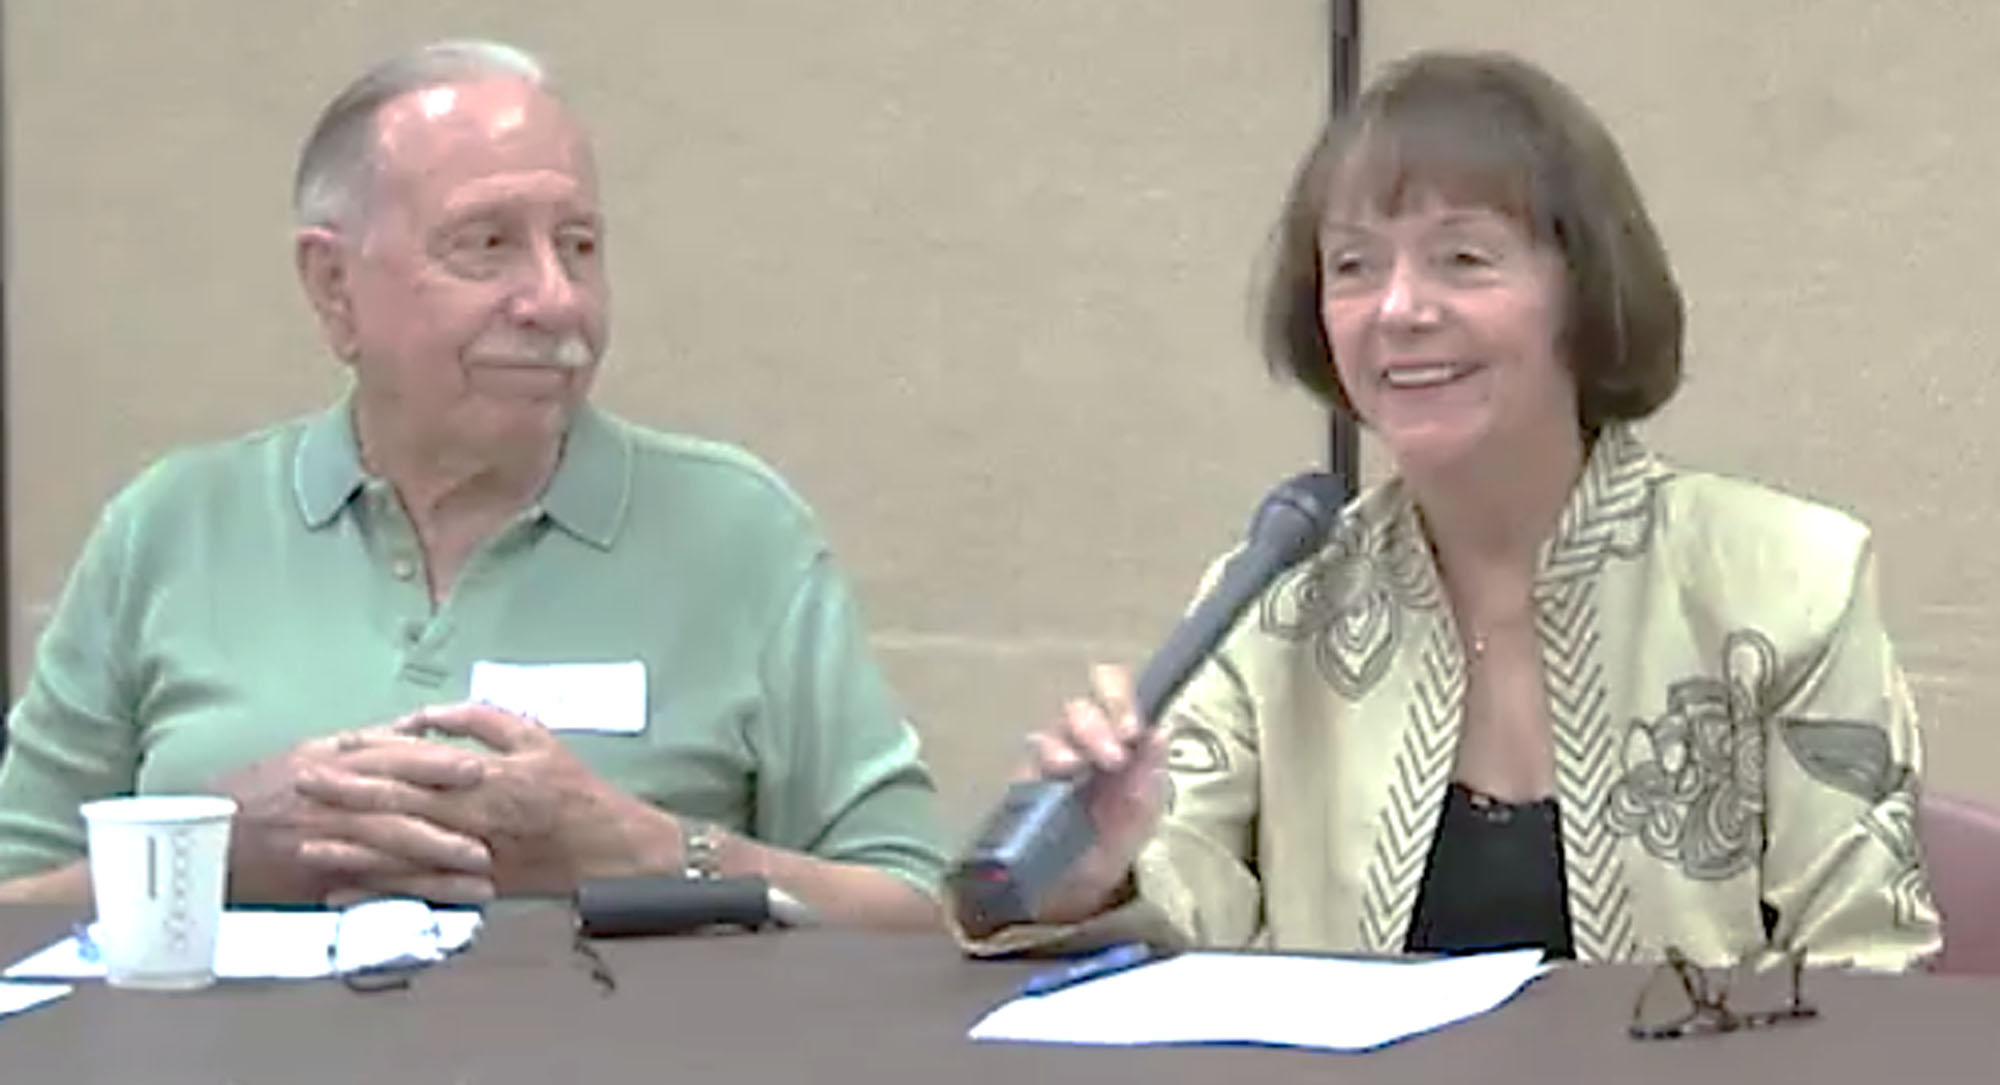 A woman smiling and speaking into a microphone during a meeting with a man seated next to her